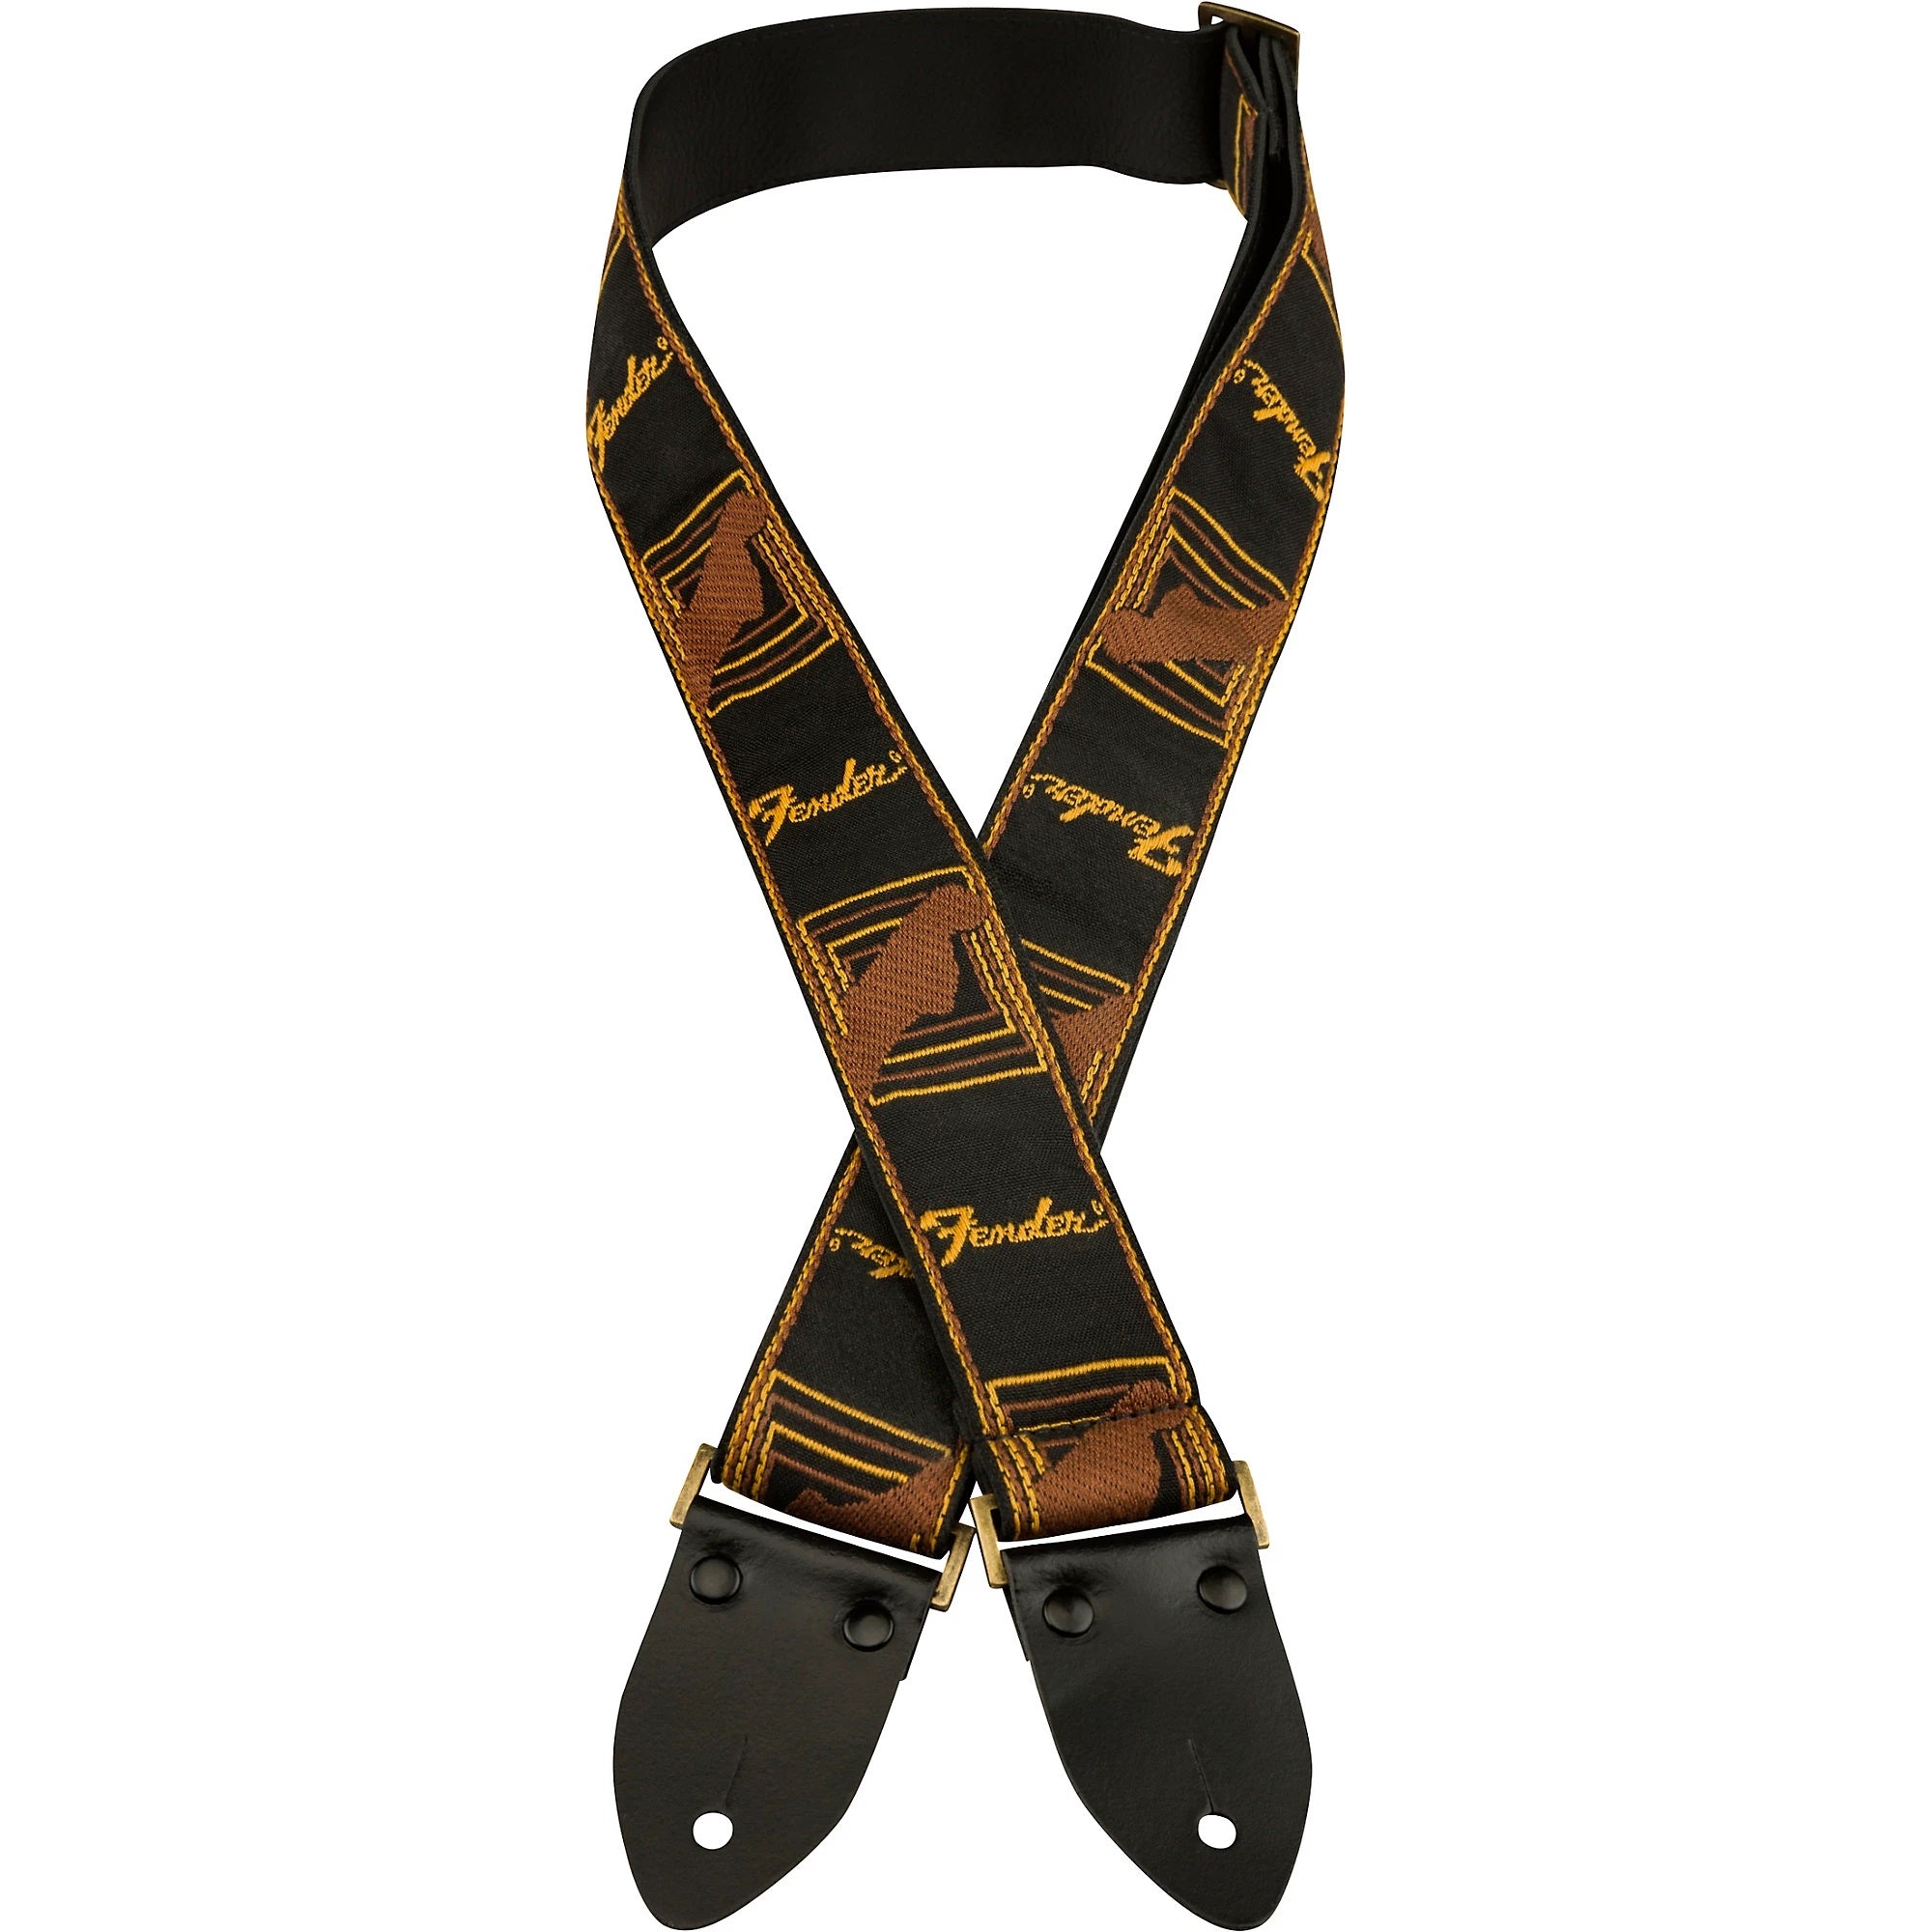 Fender Legacy Monogrammed Guitar Strap Black, Yellow, and Brown 2 in.